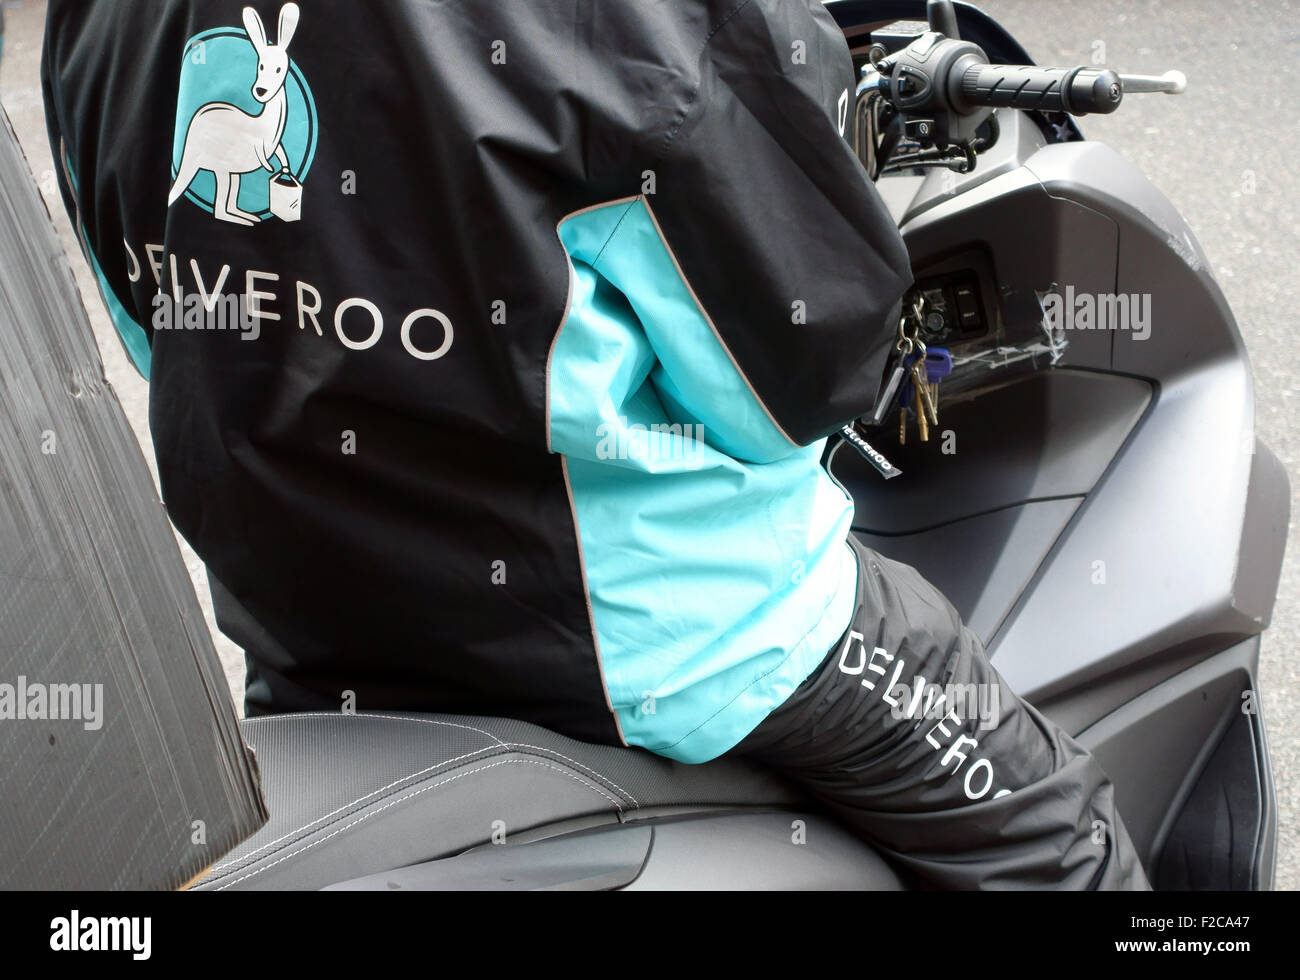 Deliveroo restaurant food delivery moped and driver, London Stock Photo